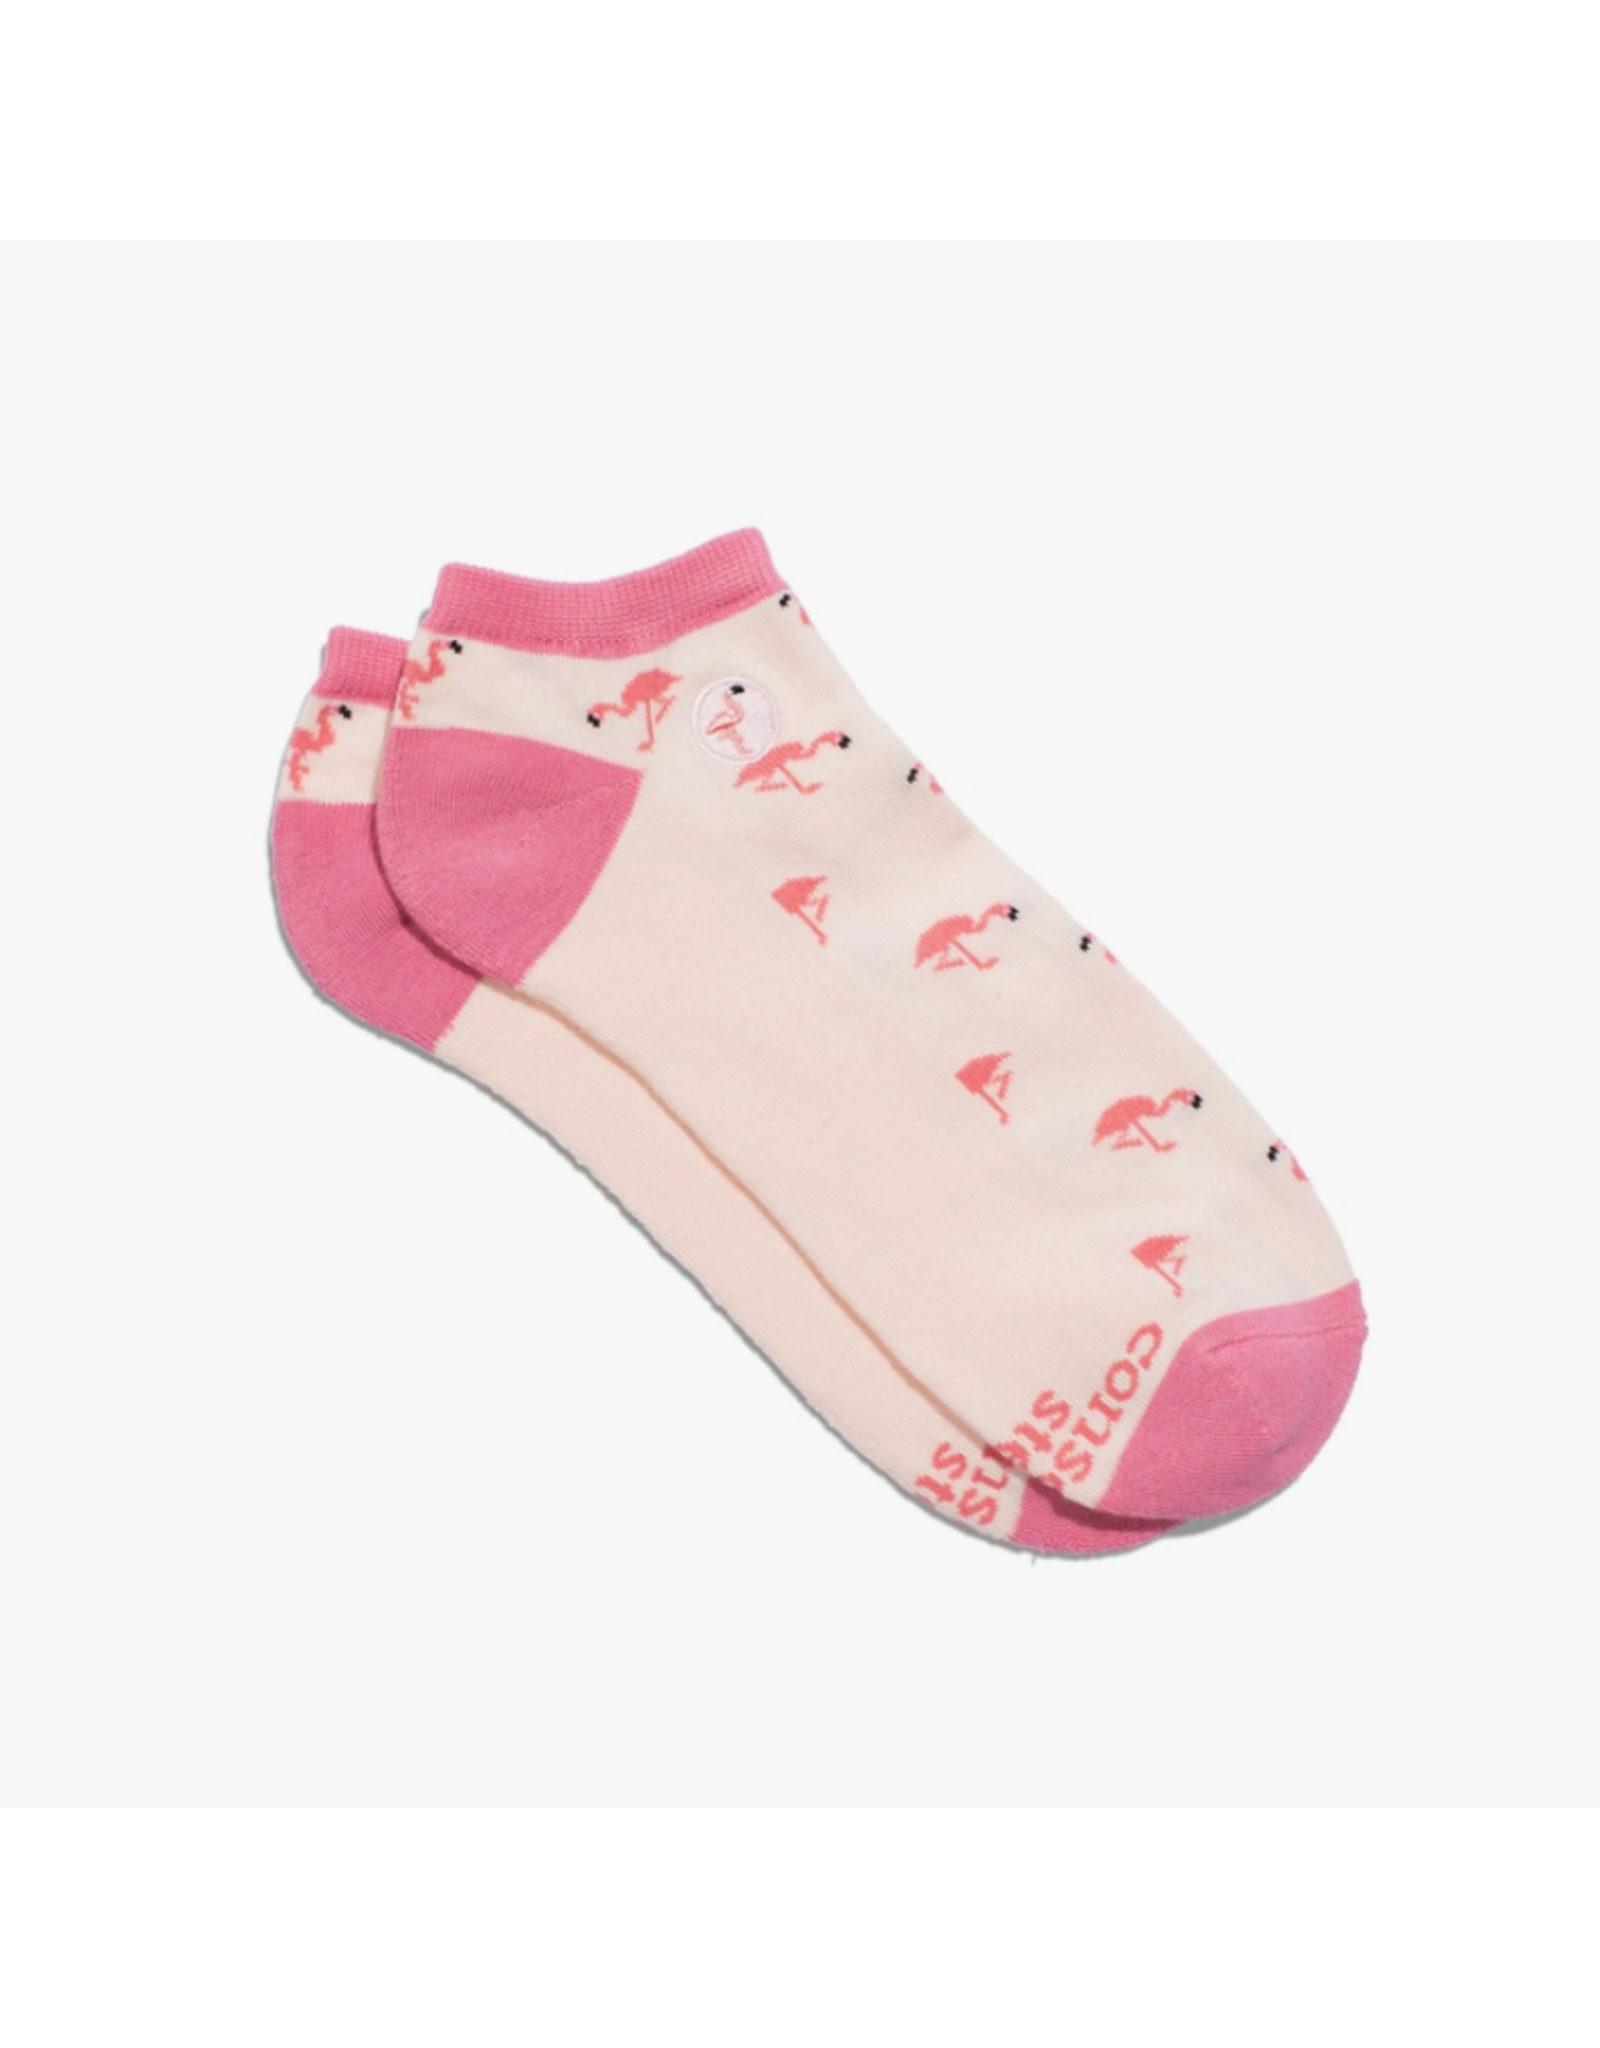 India Ankle Socks That Protect Flamingos